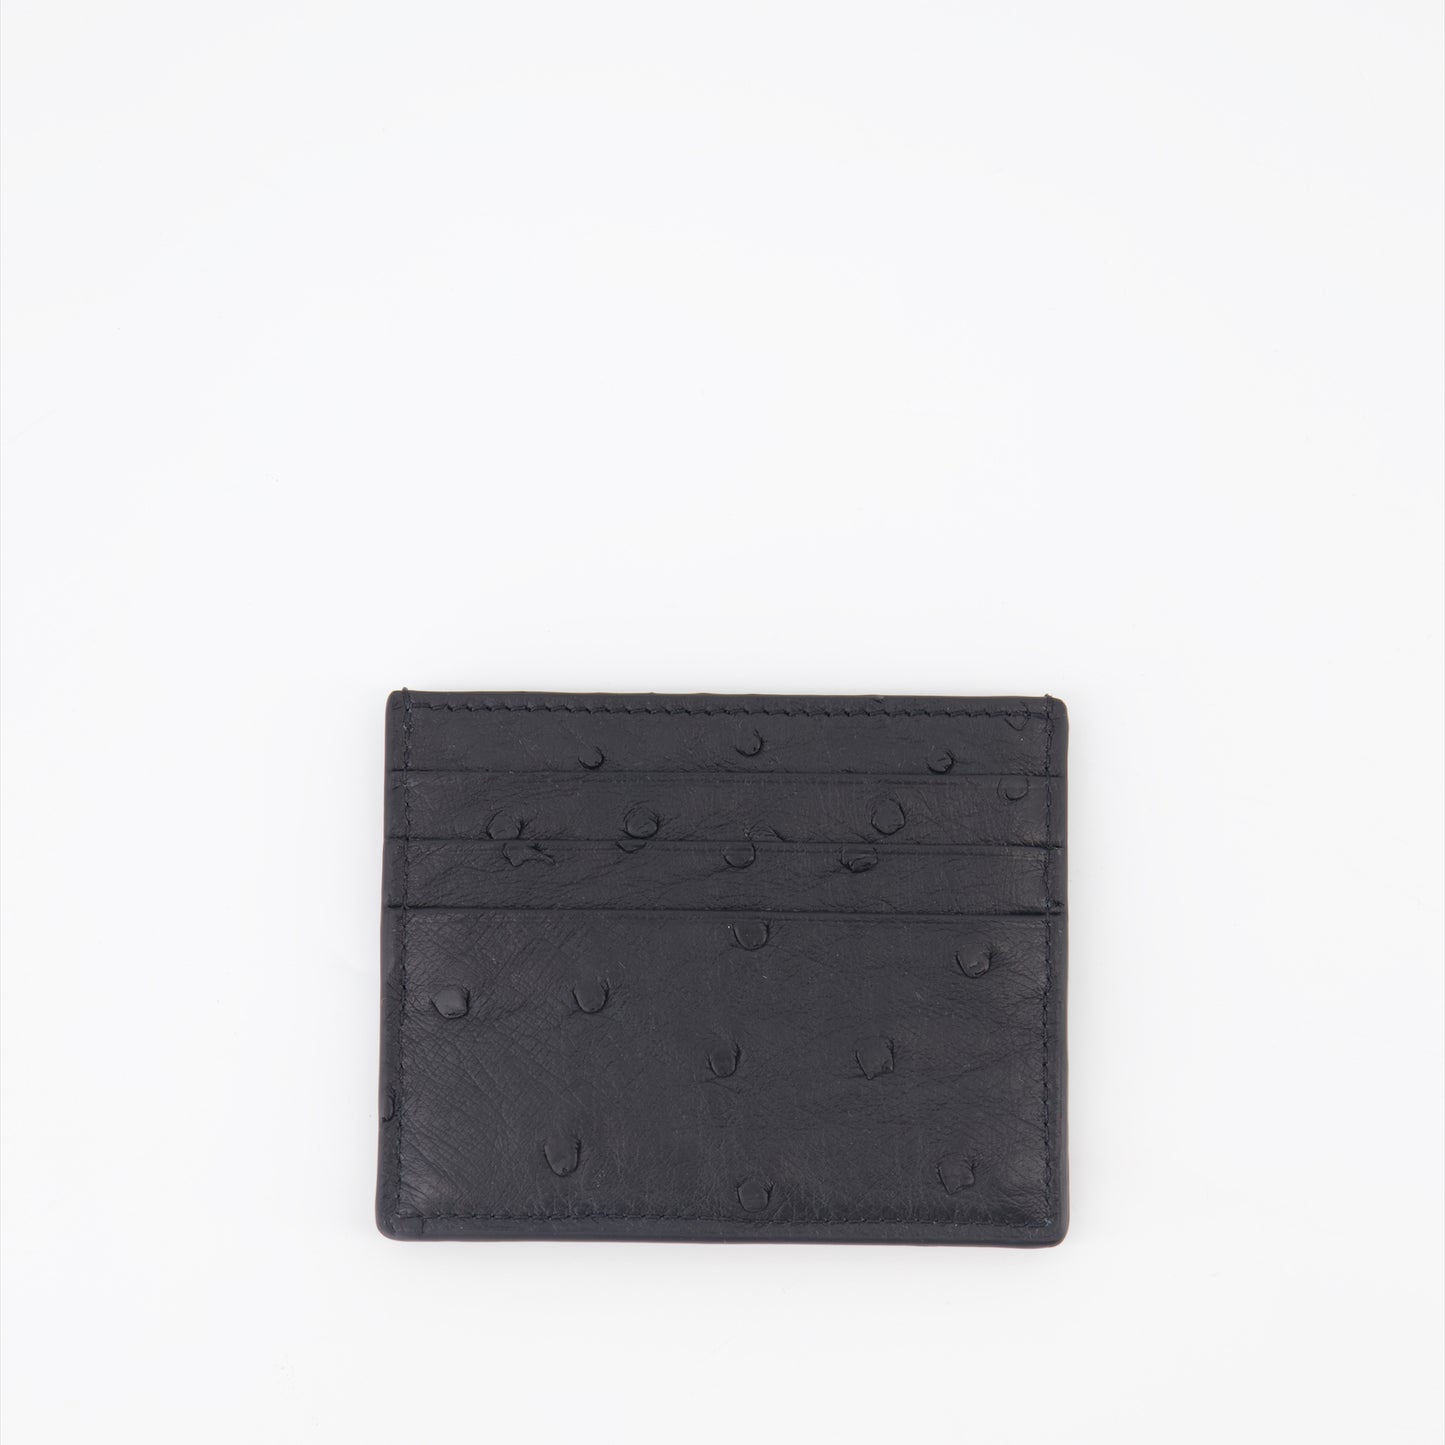 Ostrich leather card holder